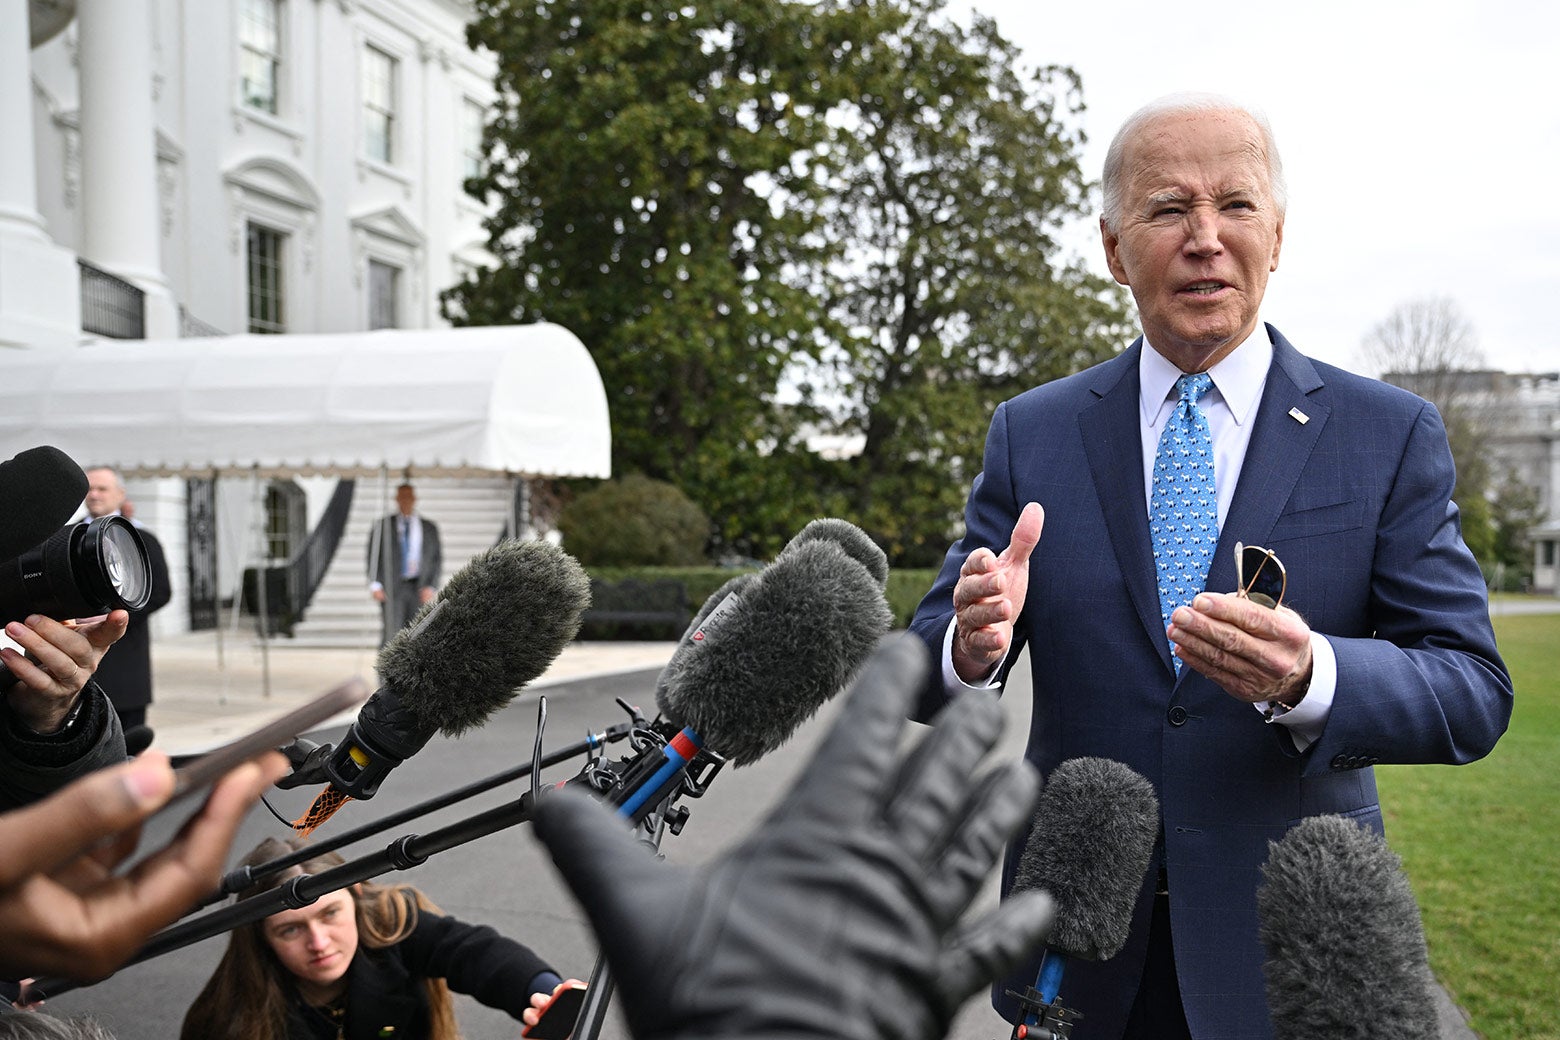 Joe Biden speaks to reporters before boarding Marine One on the South Lawn of the White House in Washington, D.C. on Tuesday. 